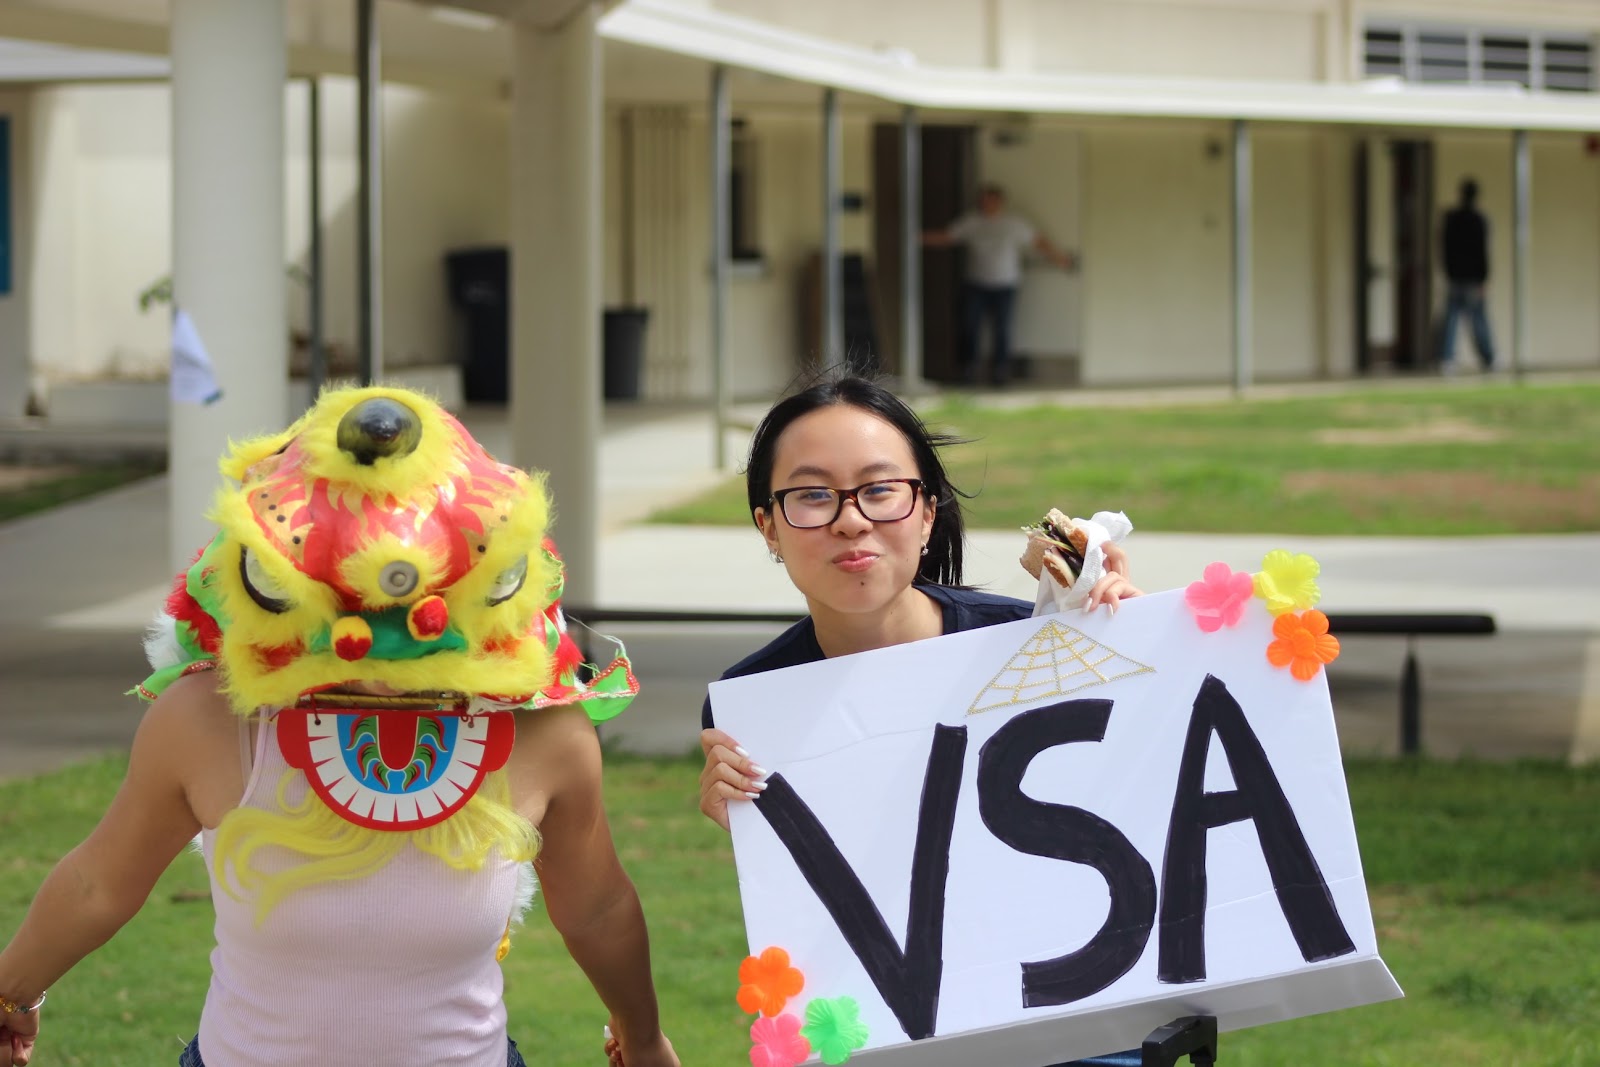 Holding up colorful signs and wearing traditional lion heads, the Vietnamese Student Alliance students show their love and pride for their club. Whether it’s interesting costumes or good vibes, VSA has it all. Find clubs like this and others only during West High’s Club Rush! 